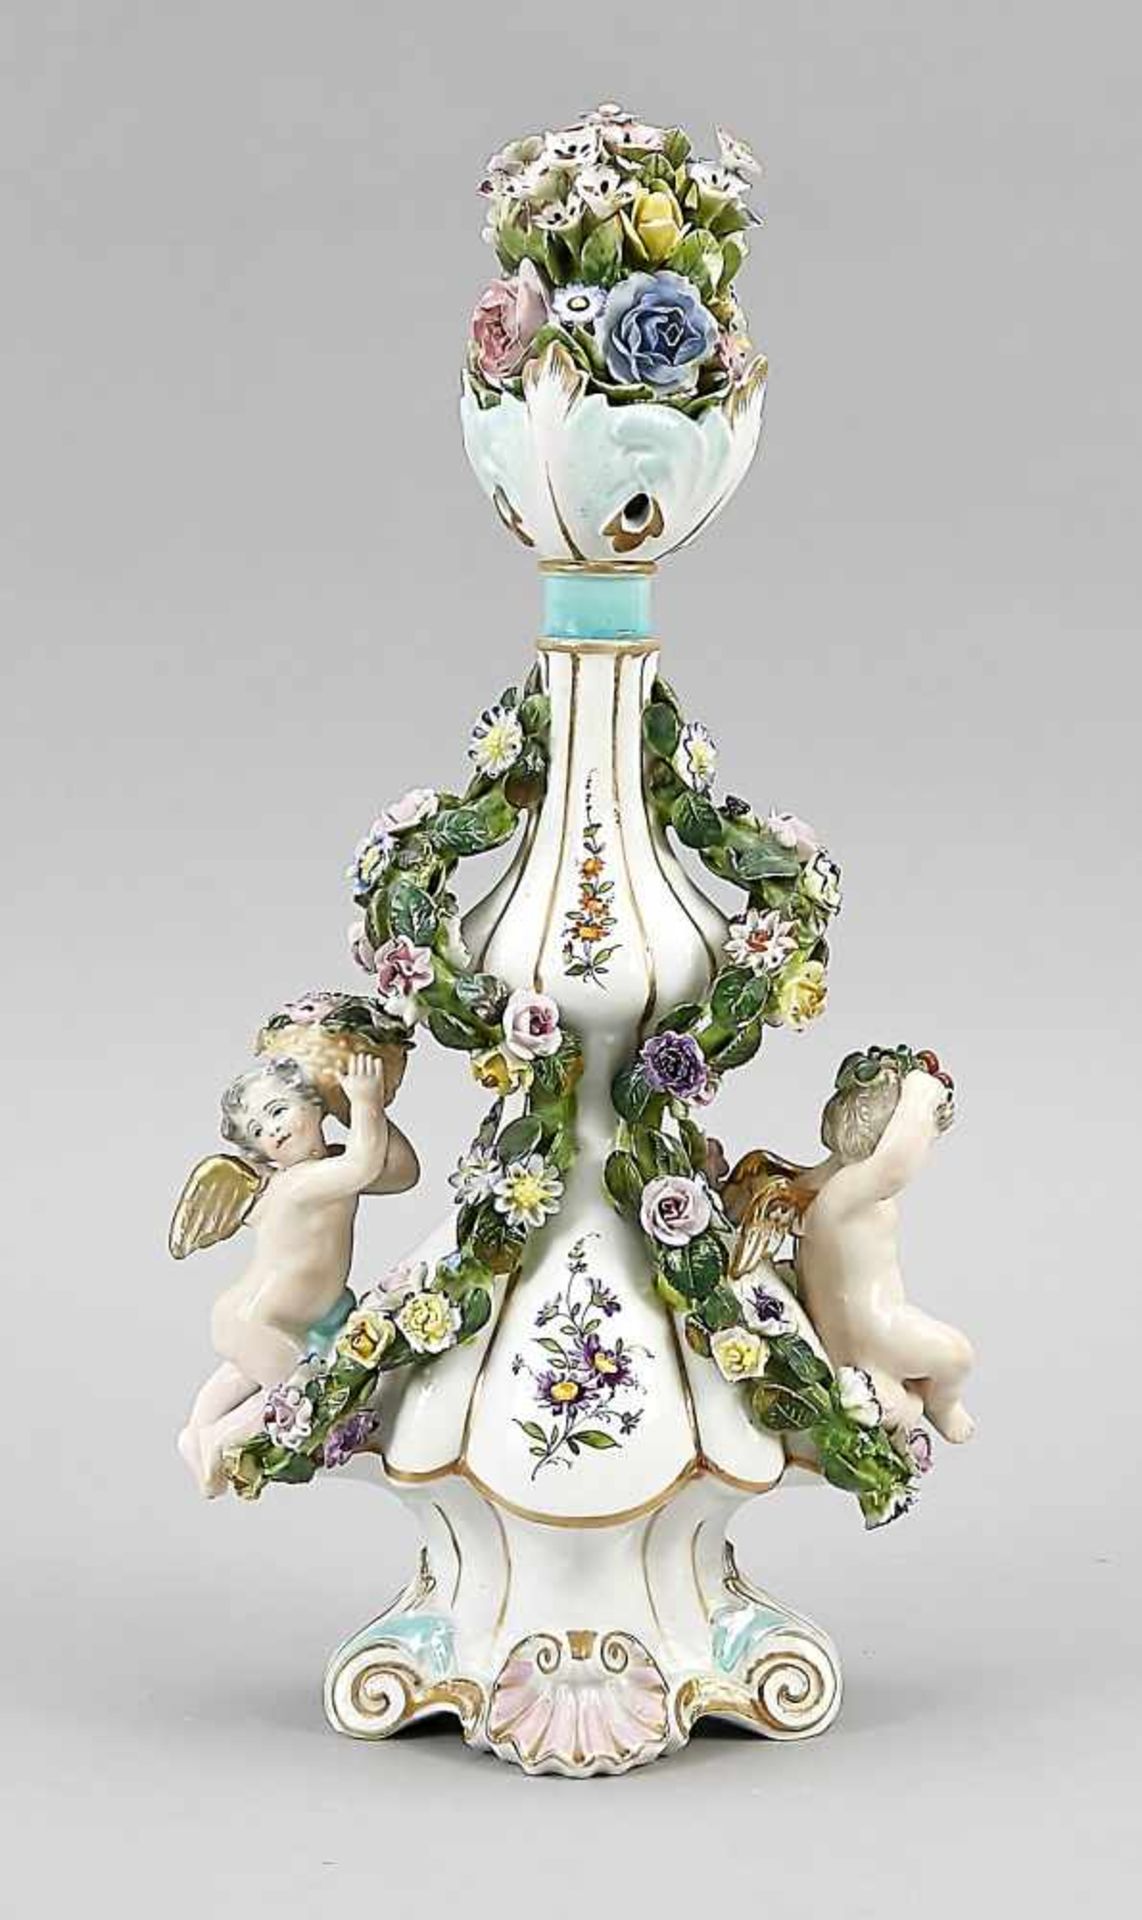 Figurative bottle with stopper, England, 19th century, after Meissen model, double gourd